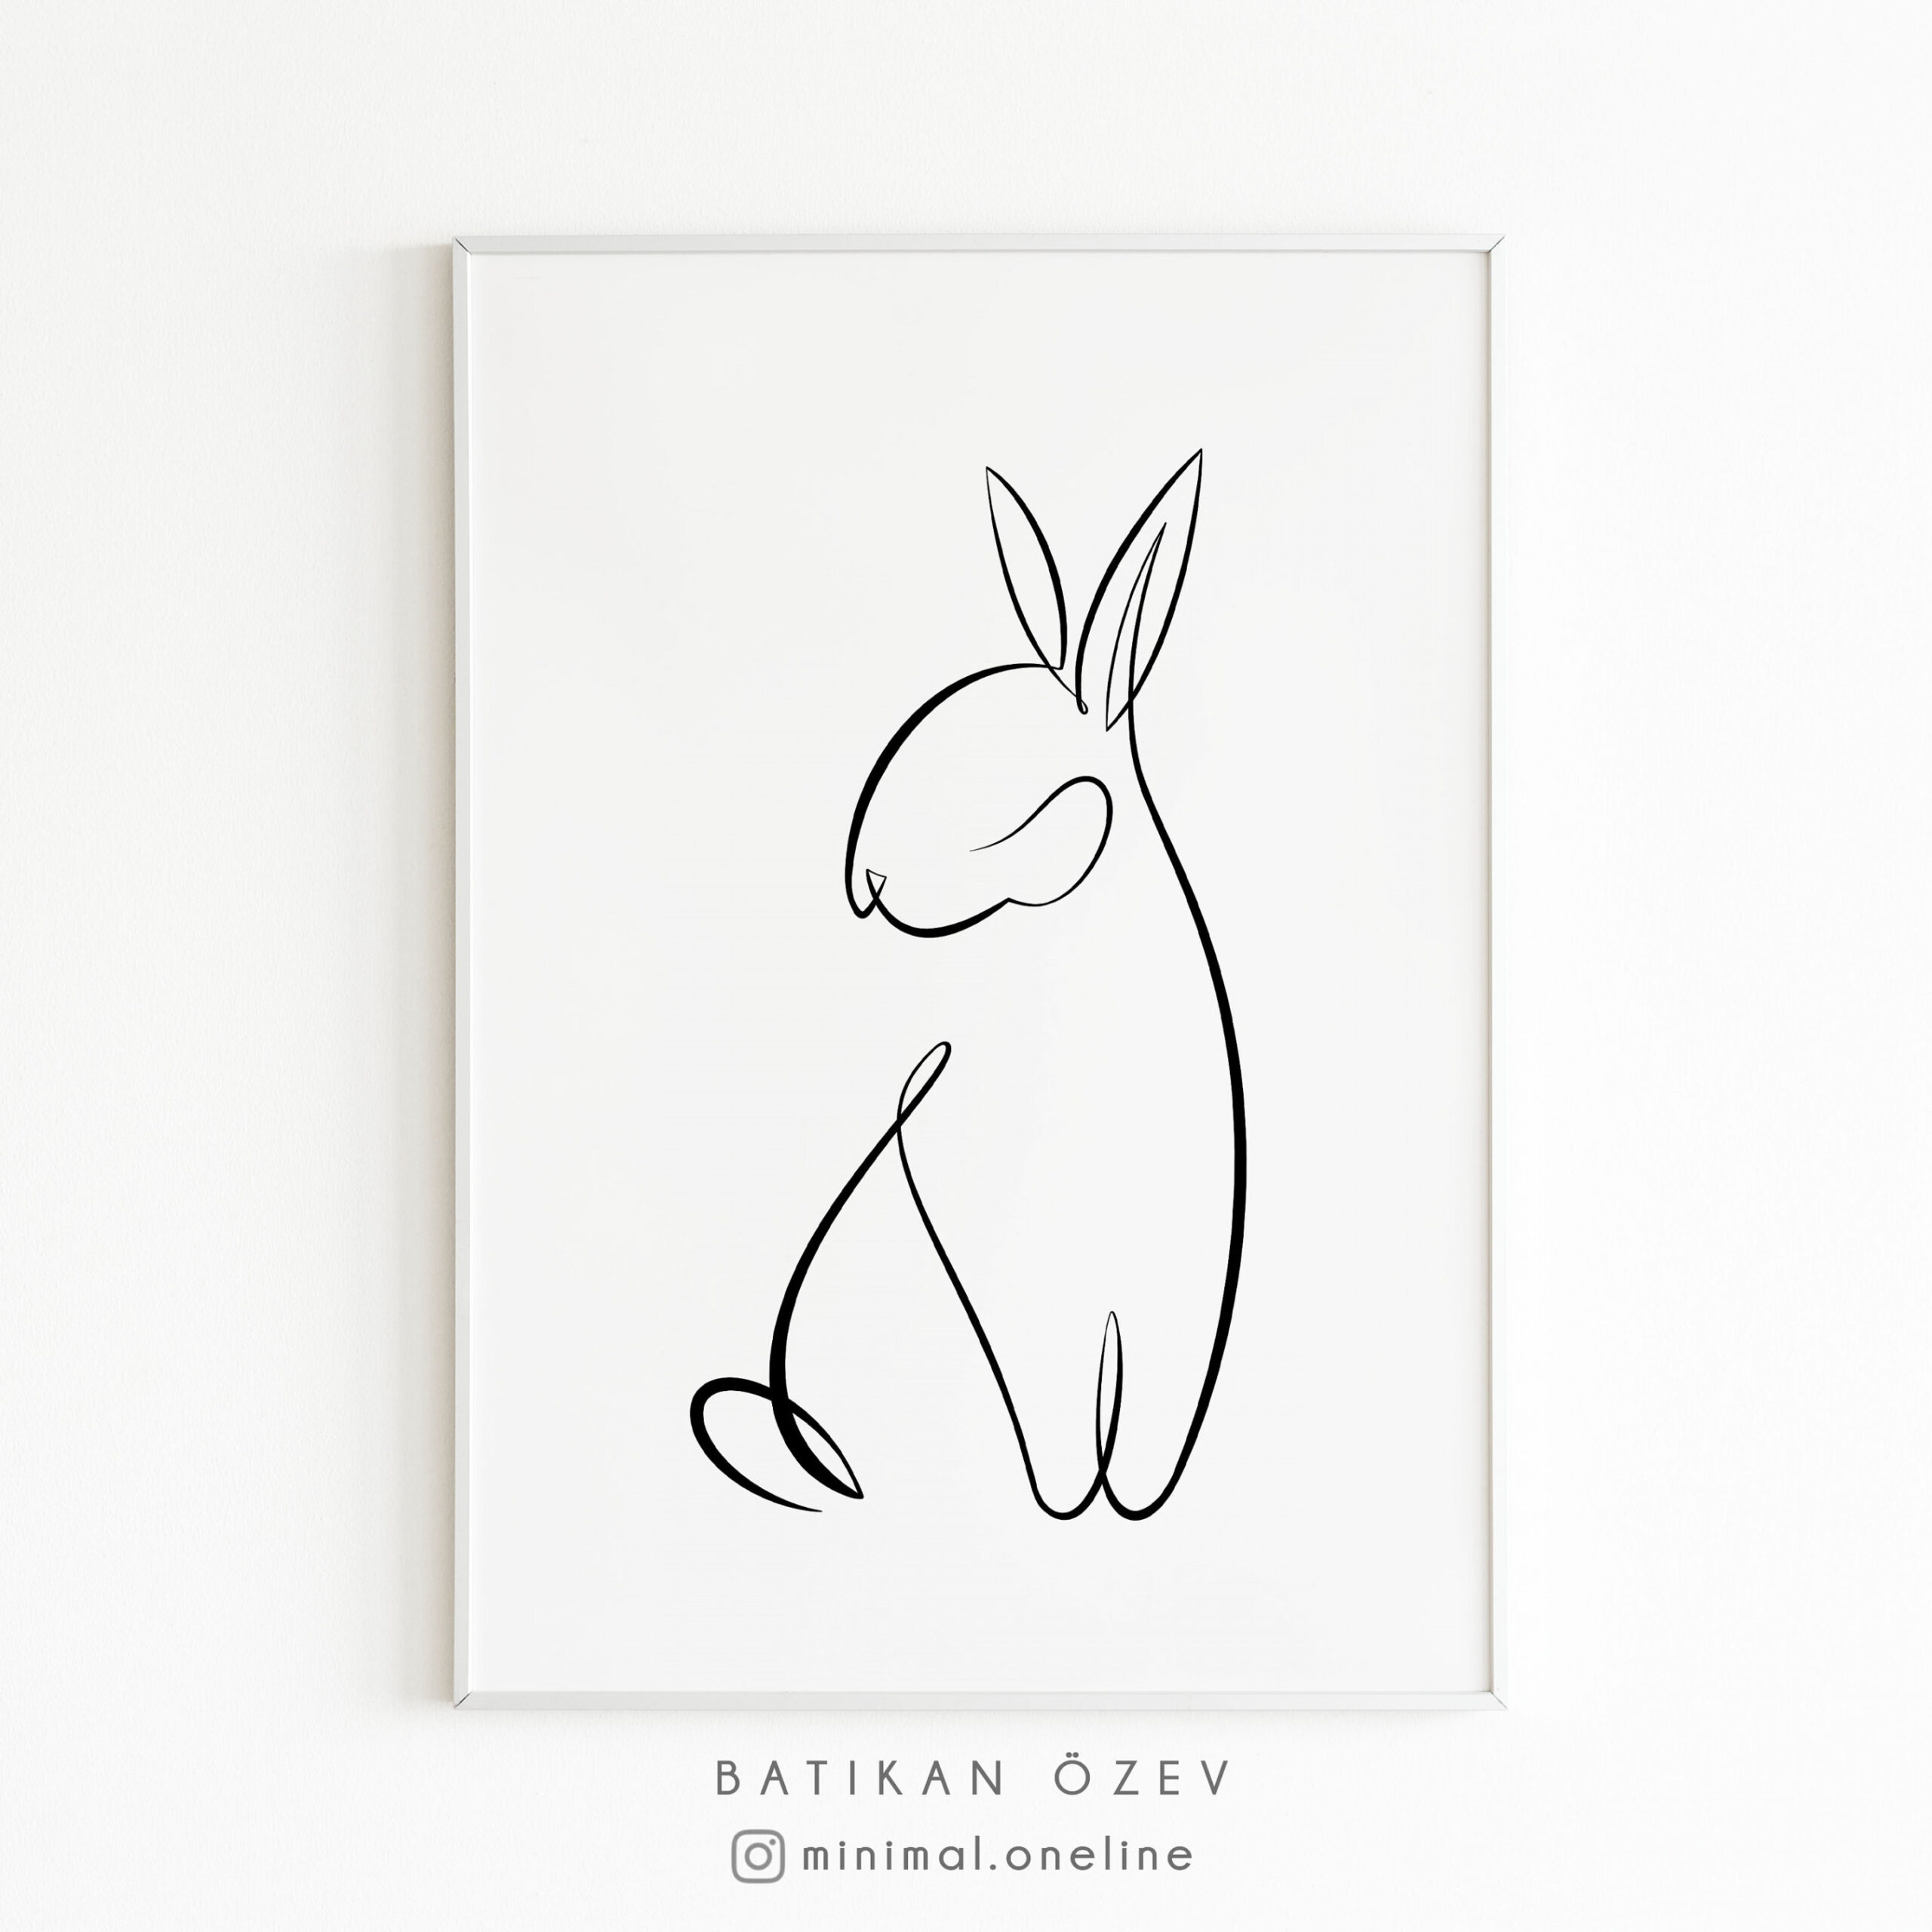 Abstract Rabbit Figure Art, Rabbit Drawing, One Line Drawing